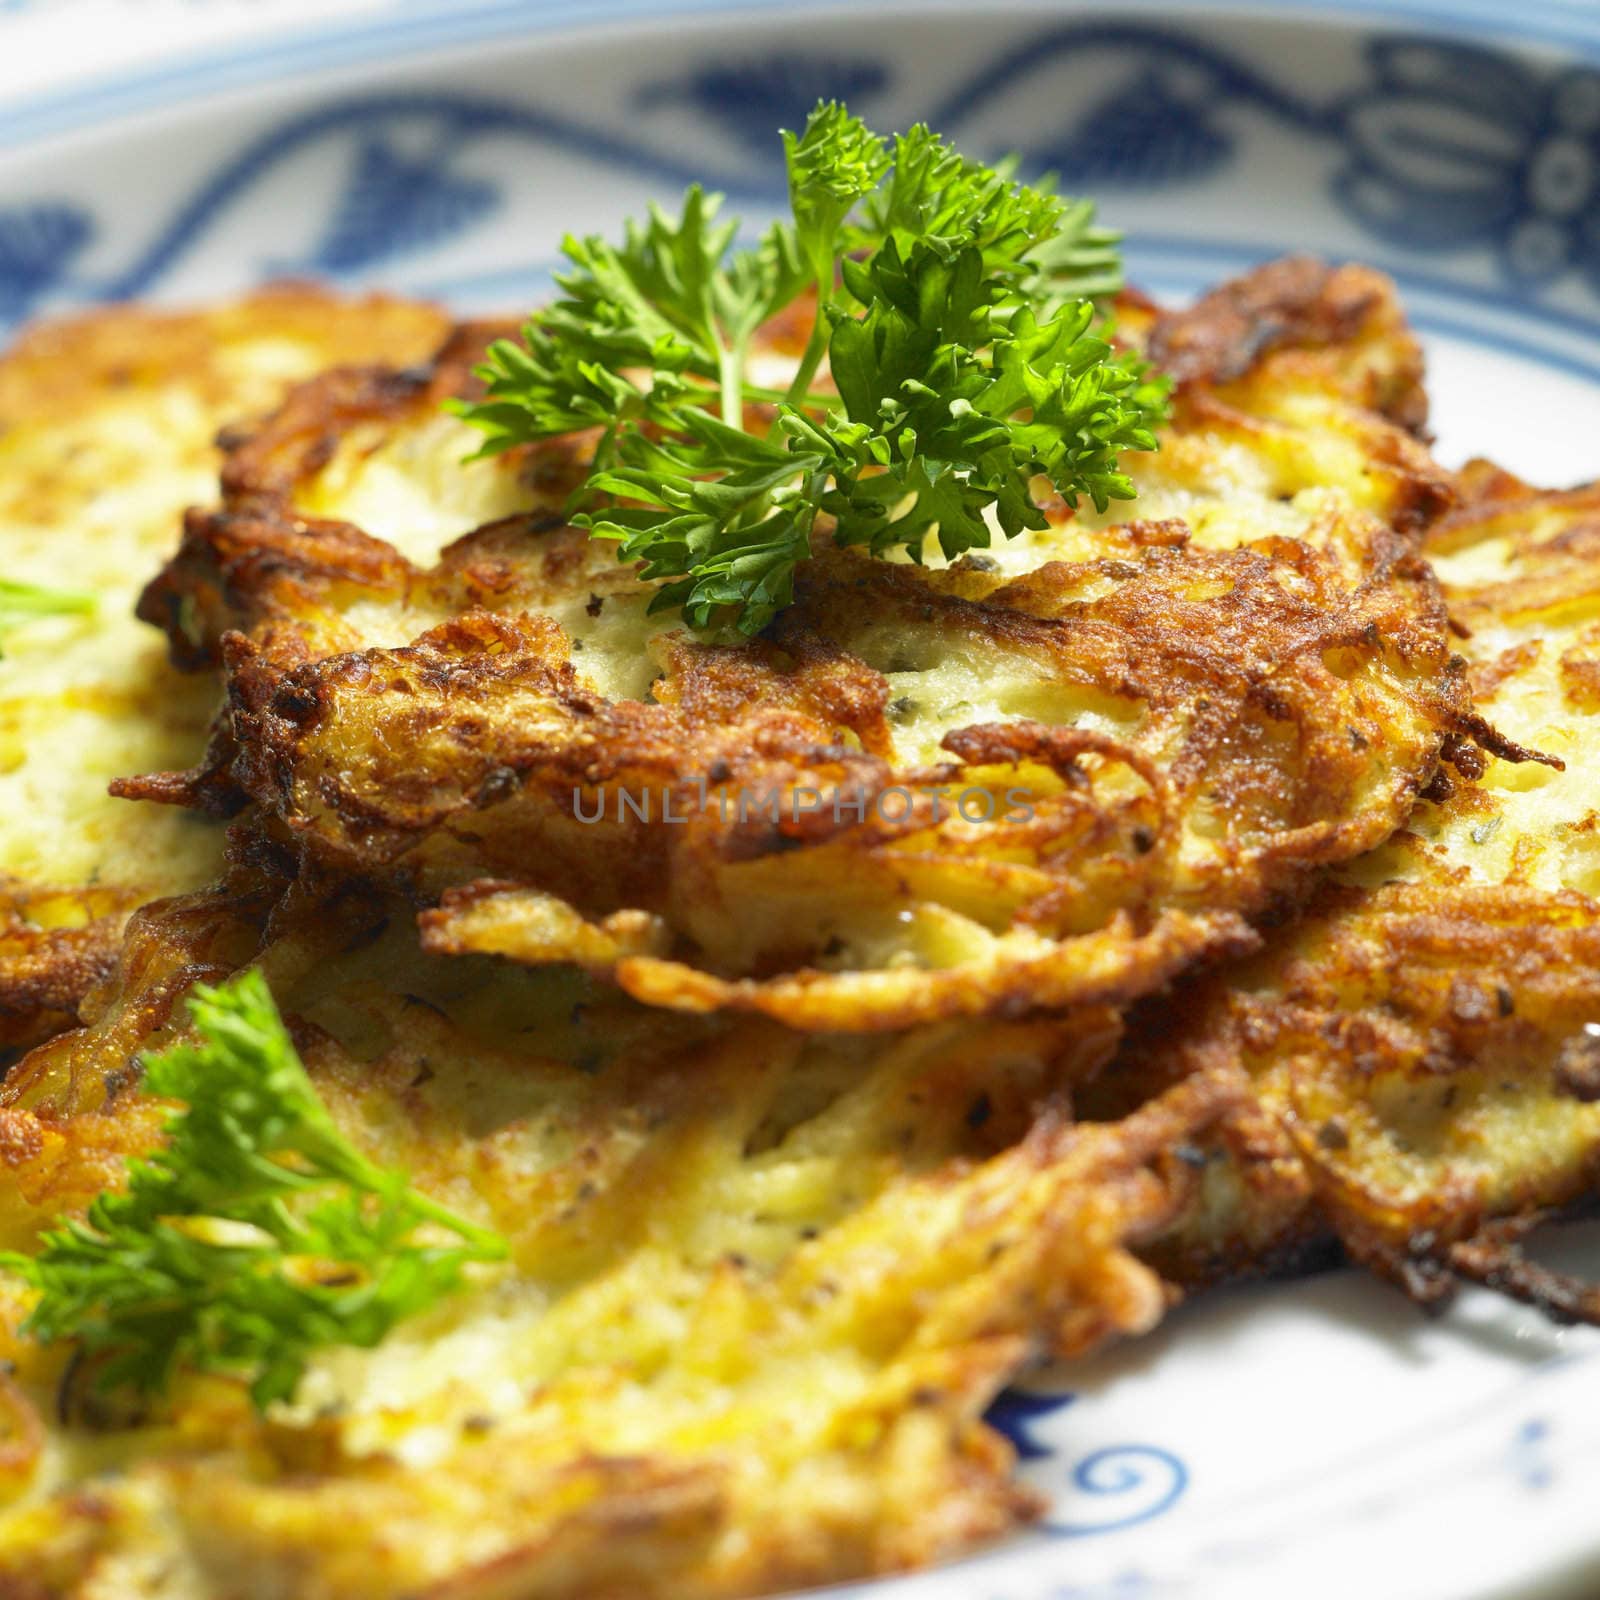 potato cakes with cabbage